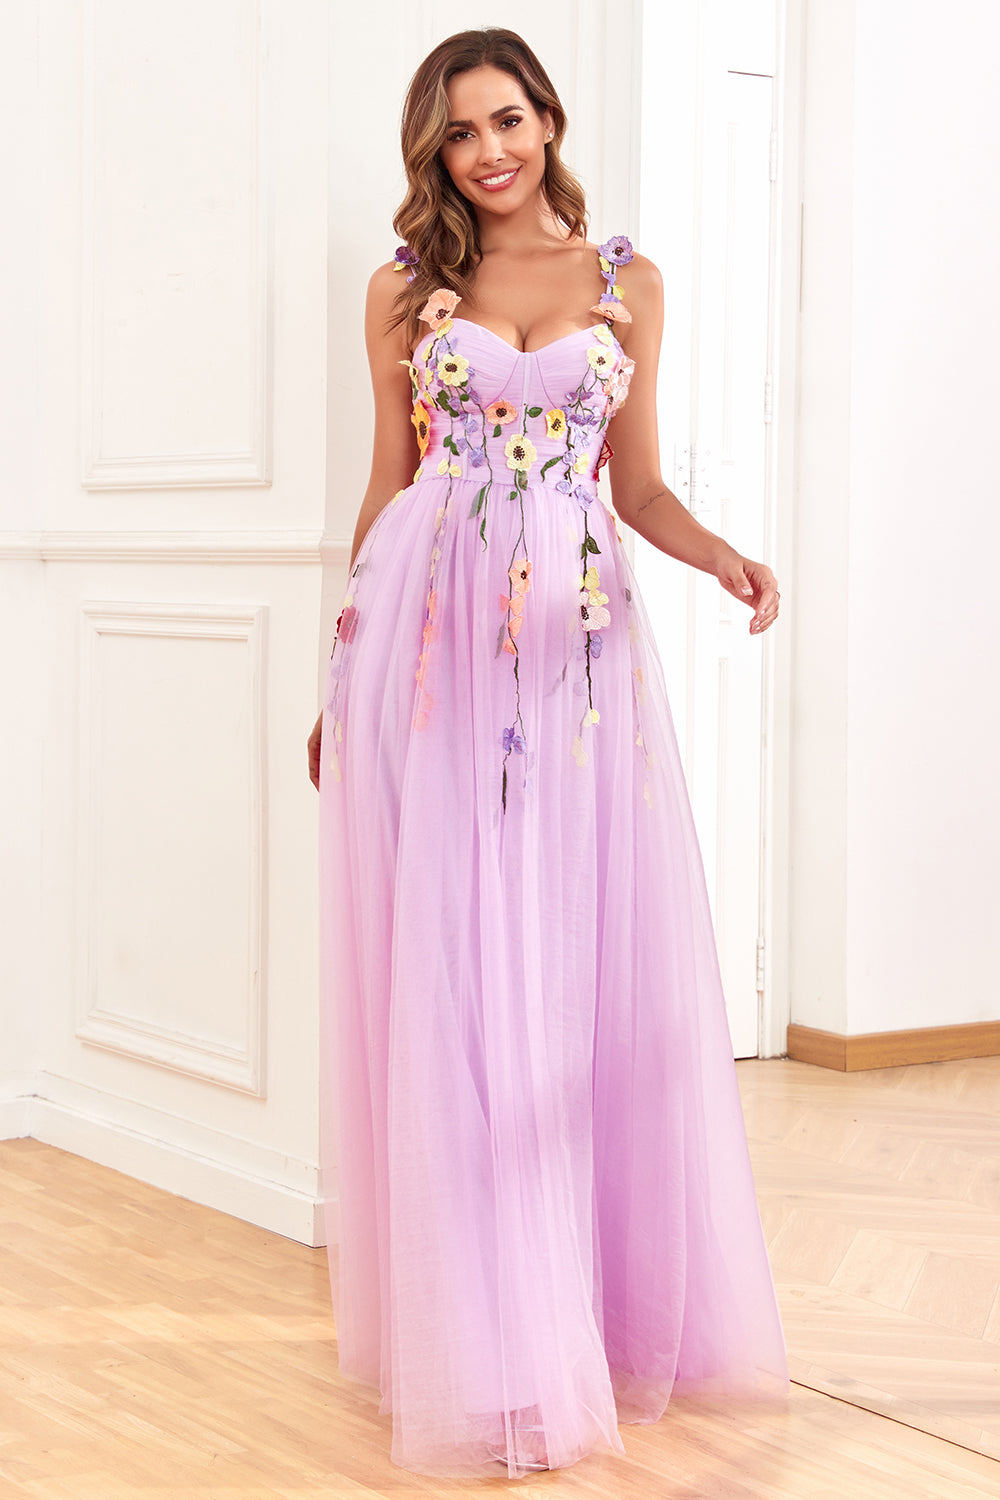 Lady Junior Princess Embroidery Light Champagne Prom Party Dress – FloraShe